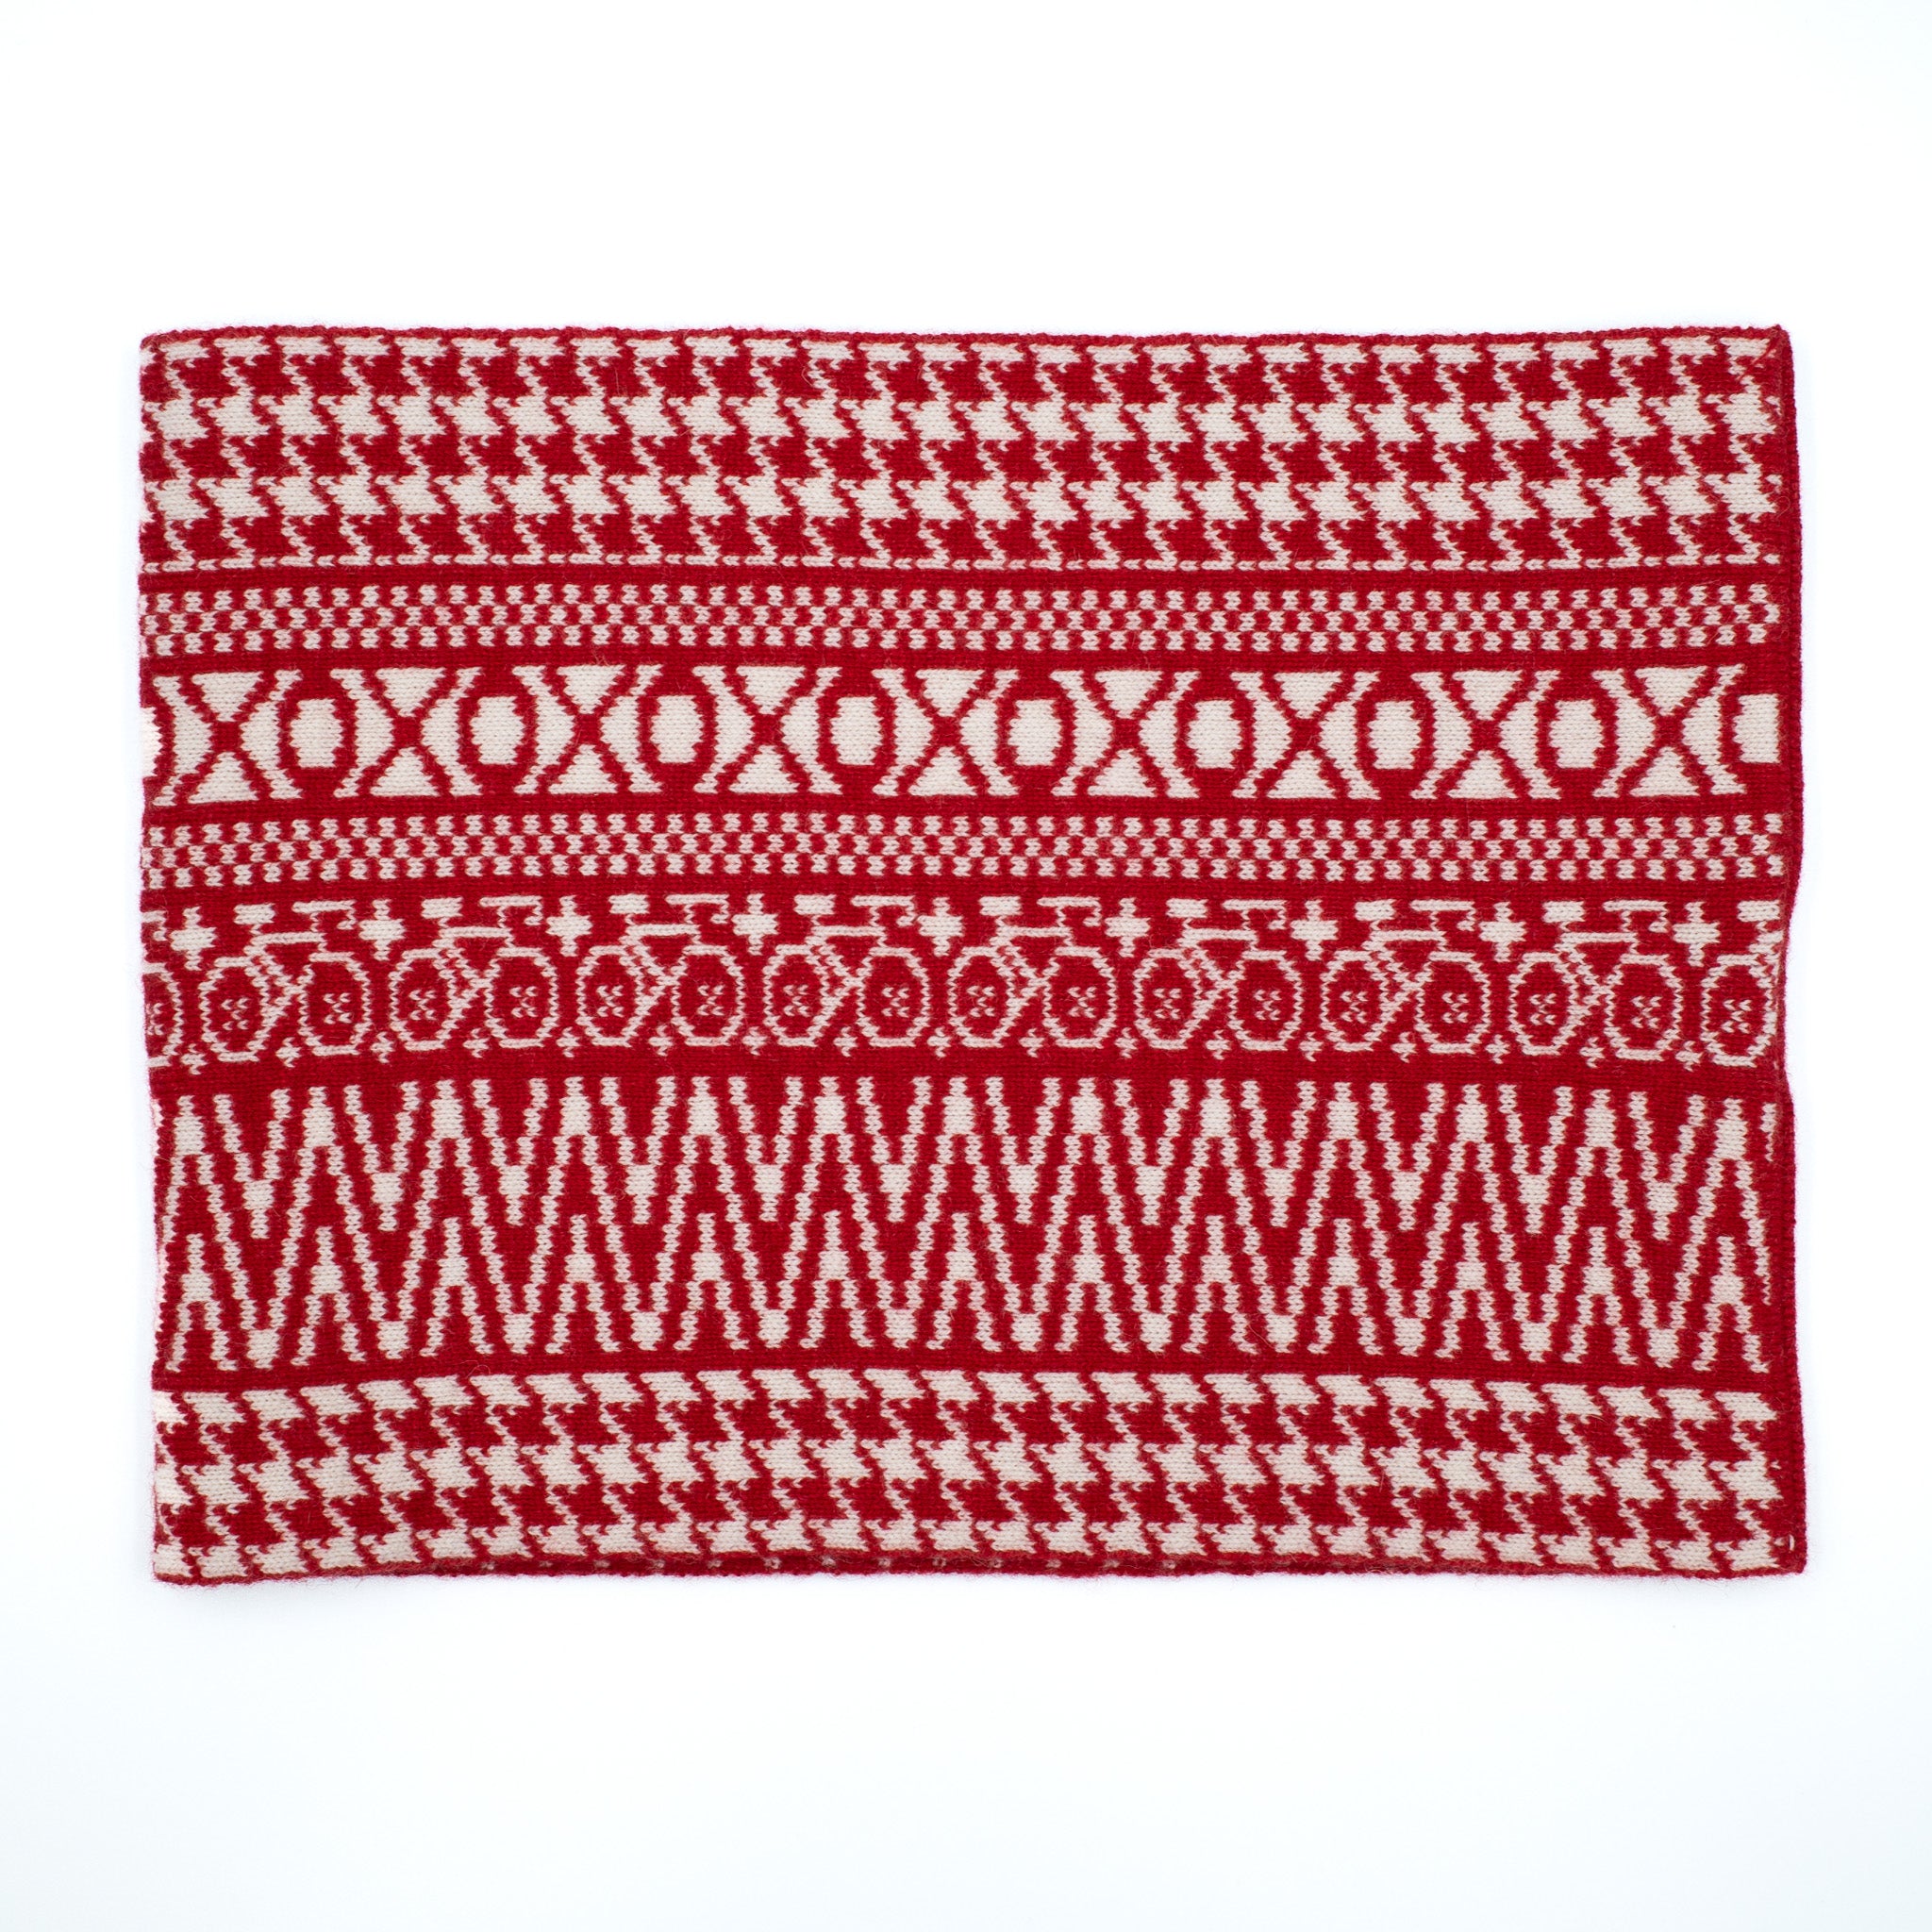 NFR Neck Warmer in Postie Red and Winter White